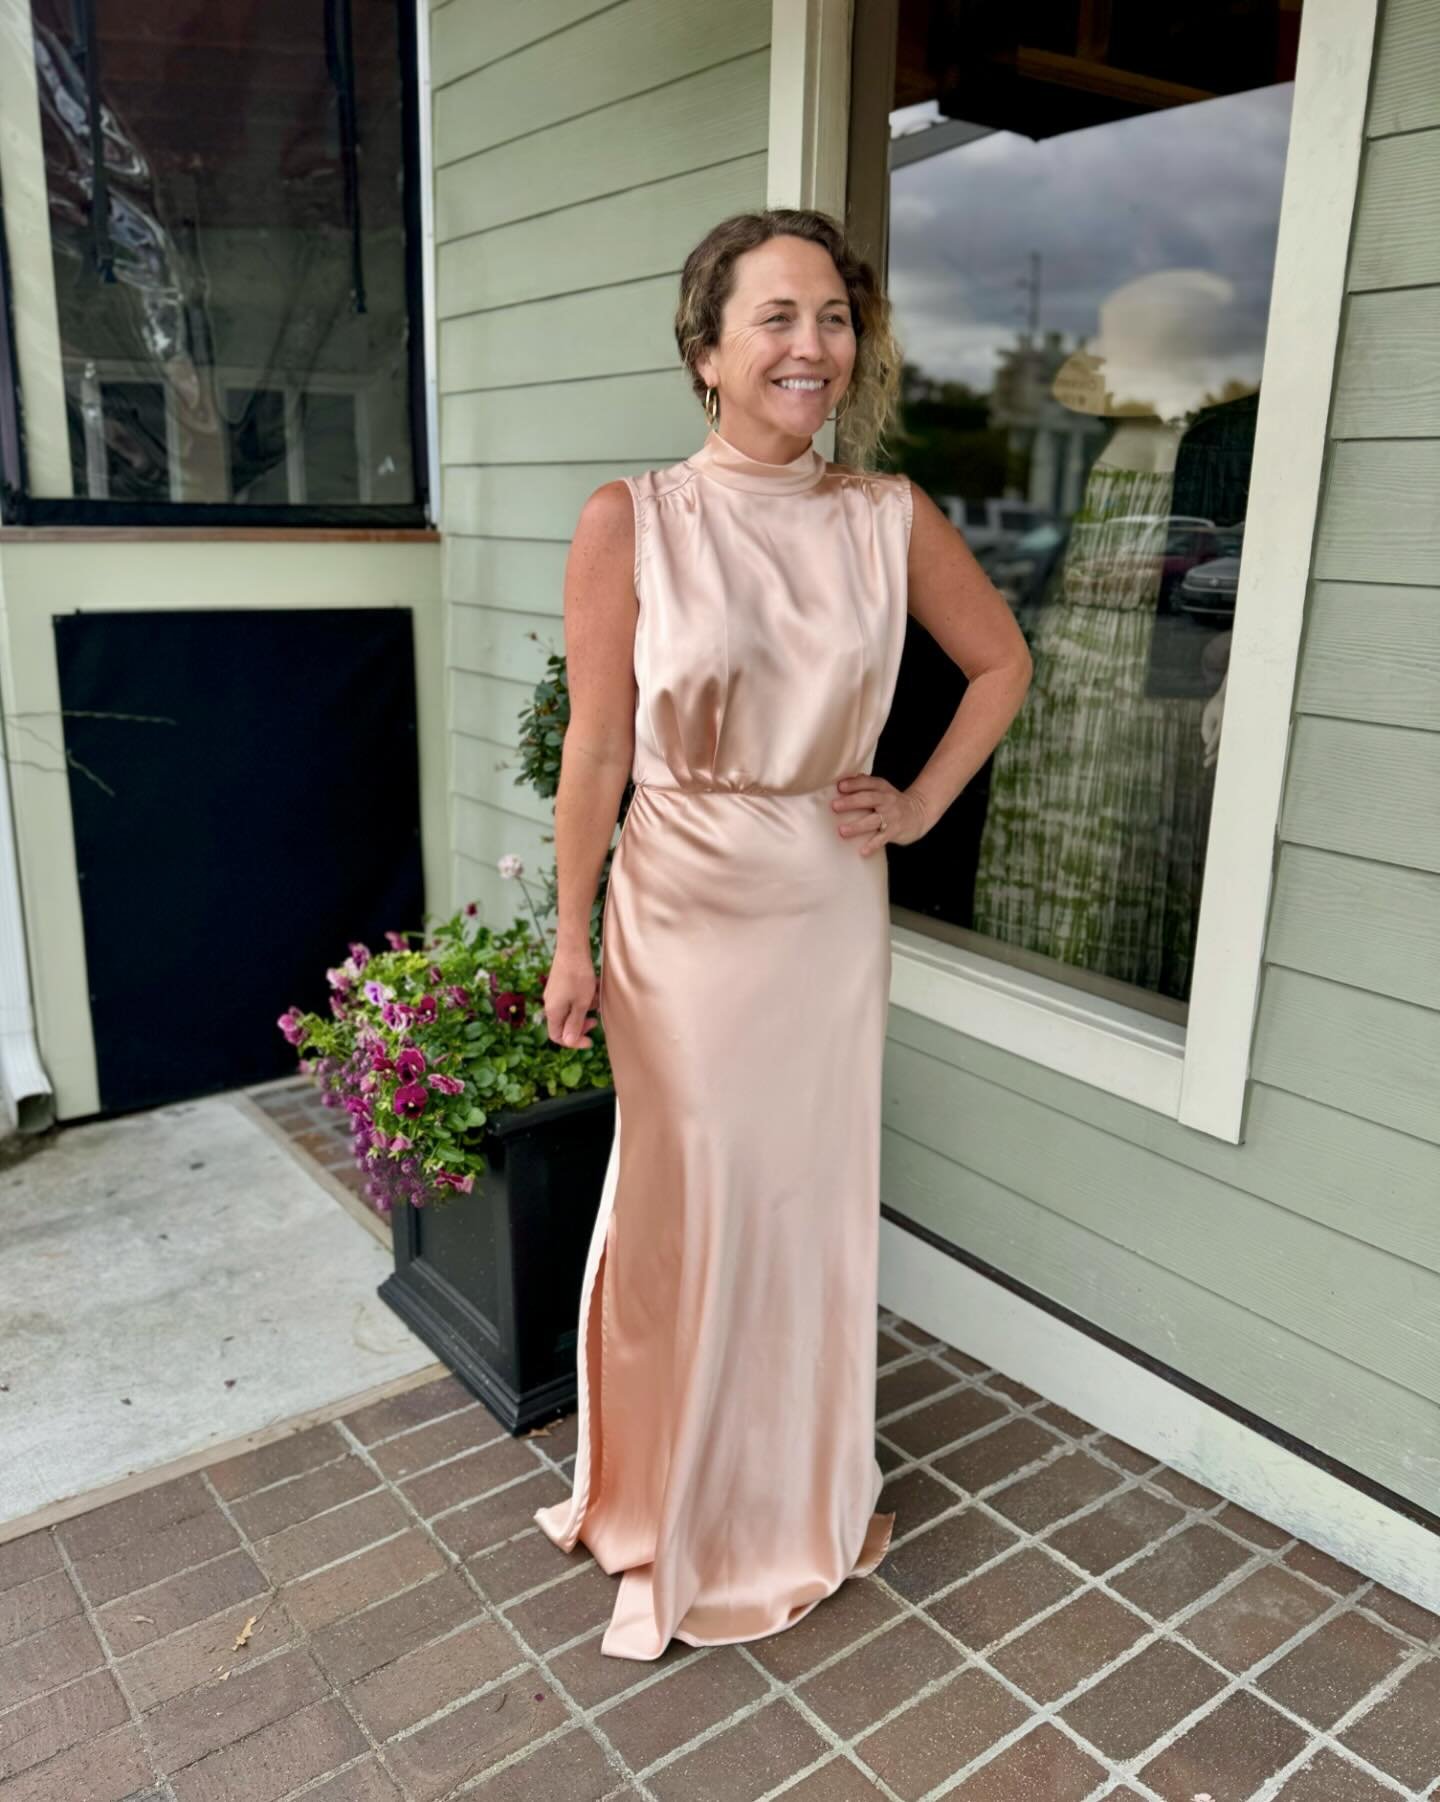 Let&rsquo;s make you the best dressed wedding guest 😉 💍 shop all the looks for every occasion and attire with us! 

#consigningwomen #cw #consign #consigning #consignment #shop #weddingguest #springdresses #formal #gown #yellowmidi #maxidress #beac